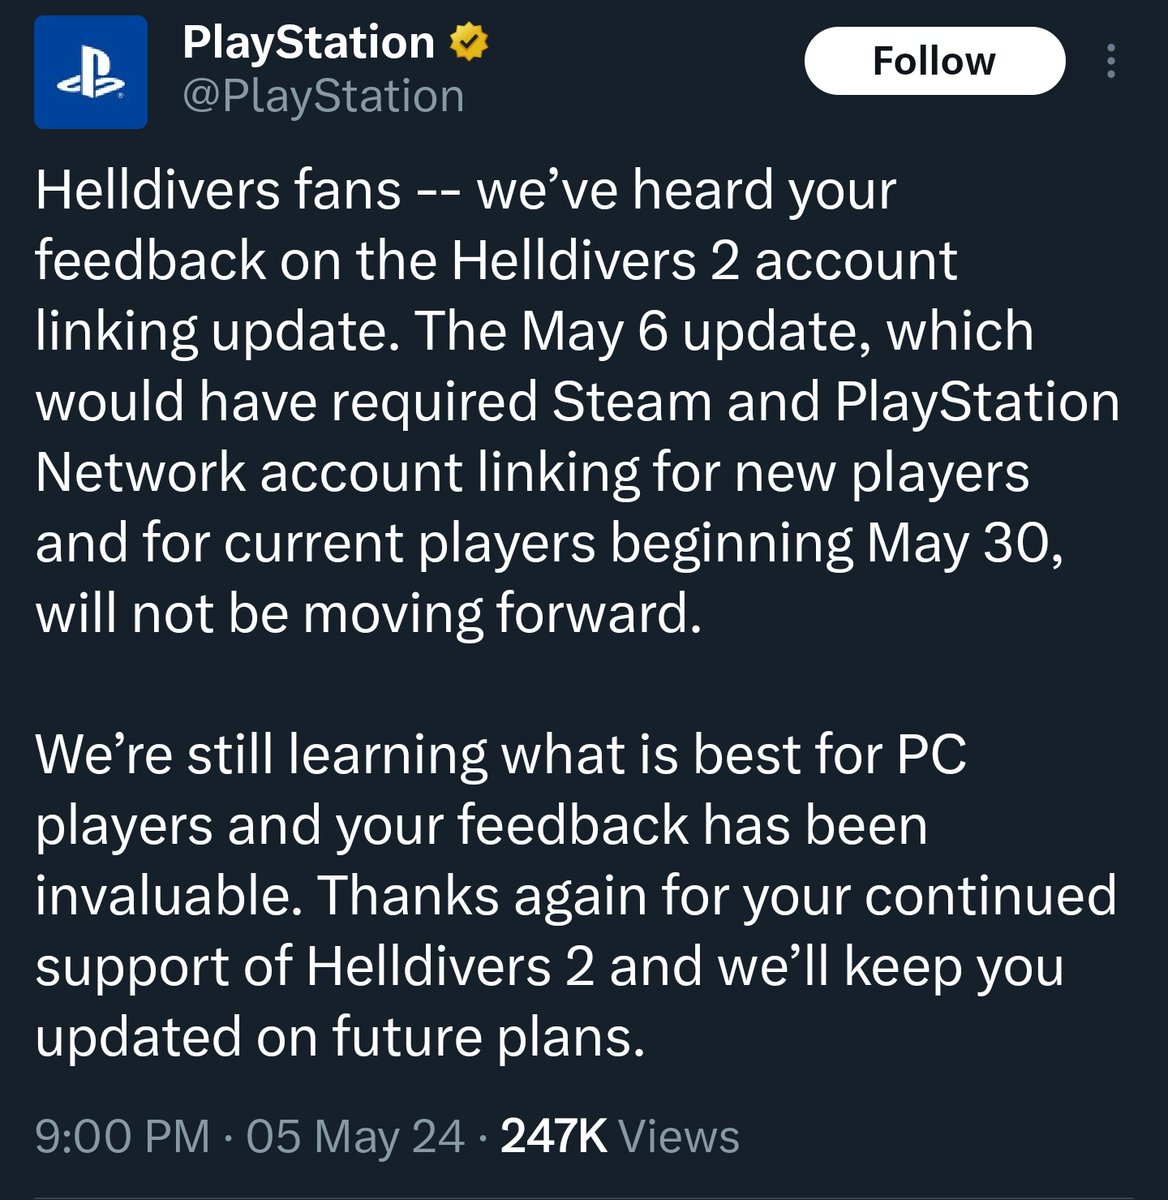 Sony will now NOT be requiring PC players to sign into PSN to play Helldivers 2.